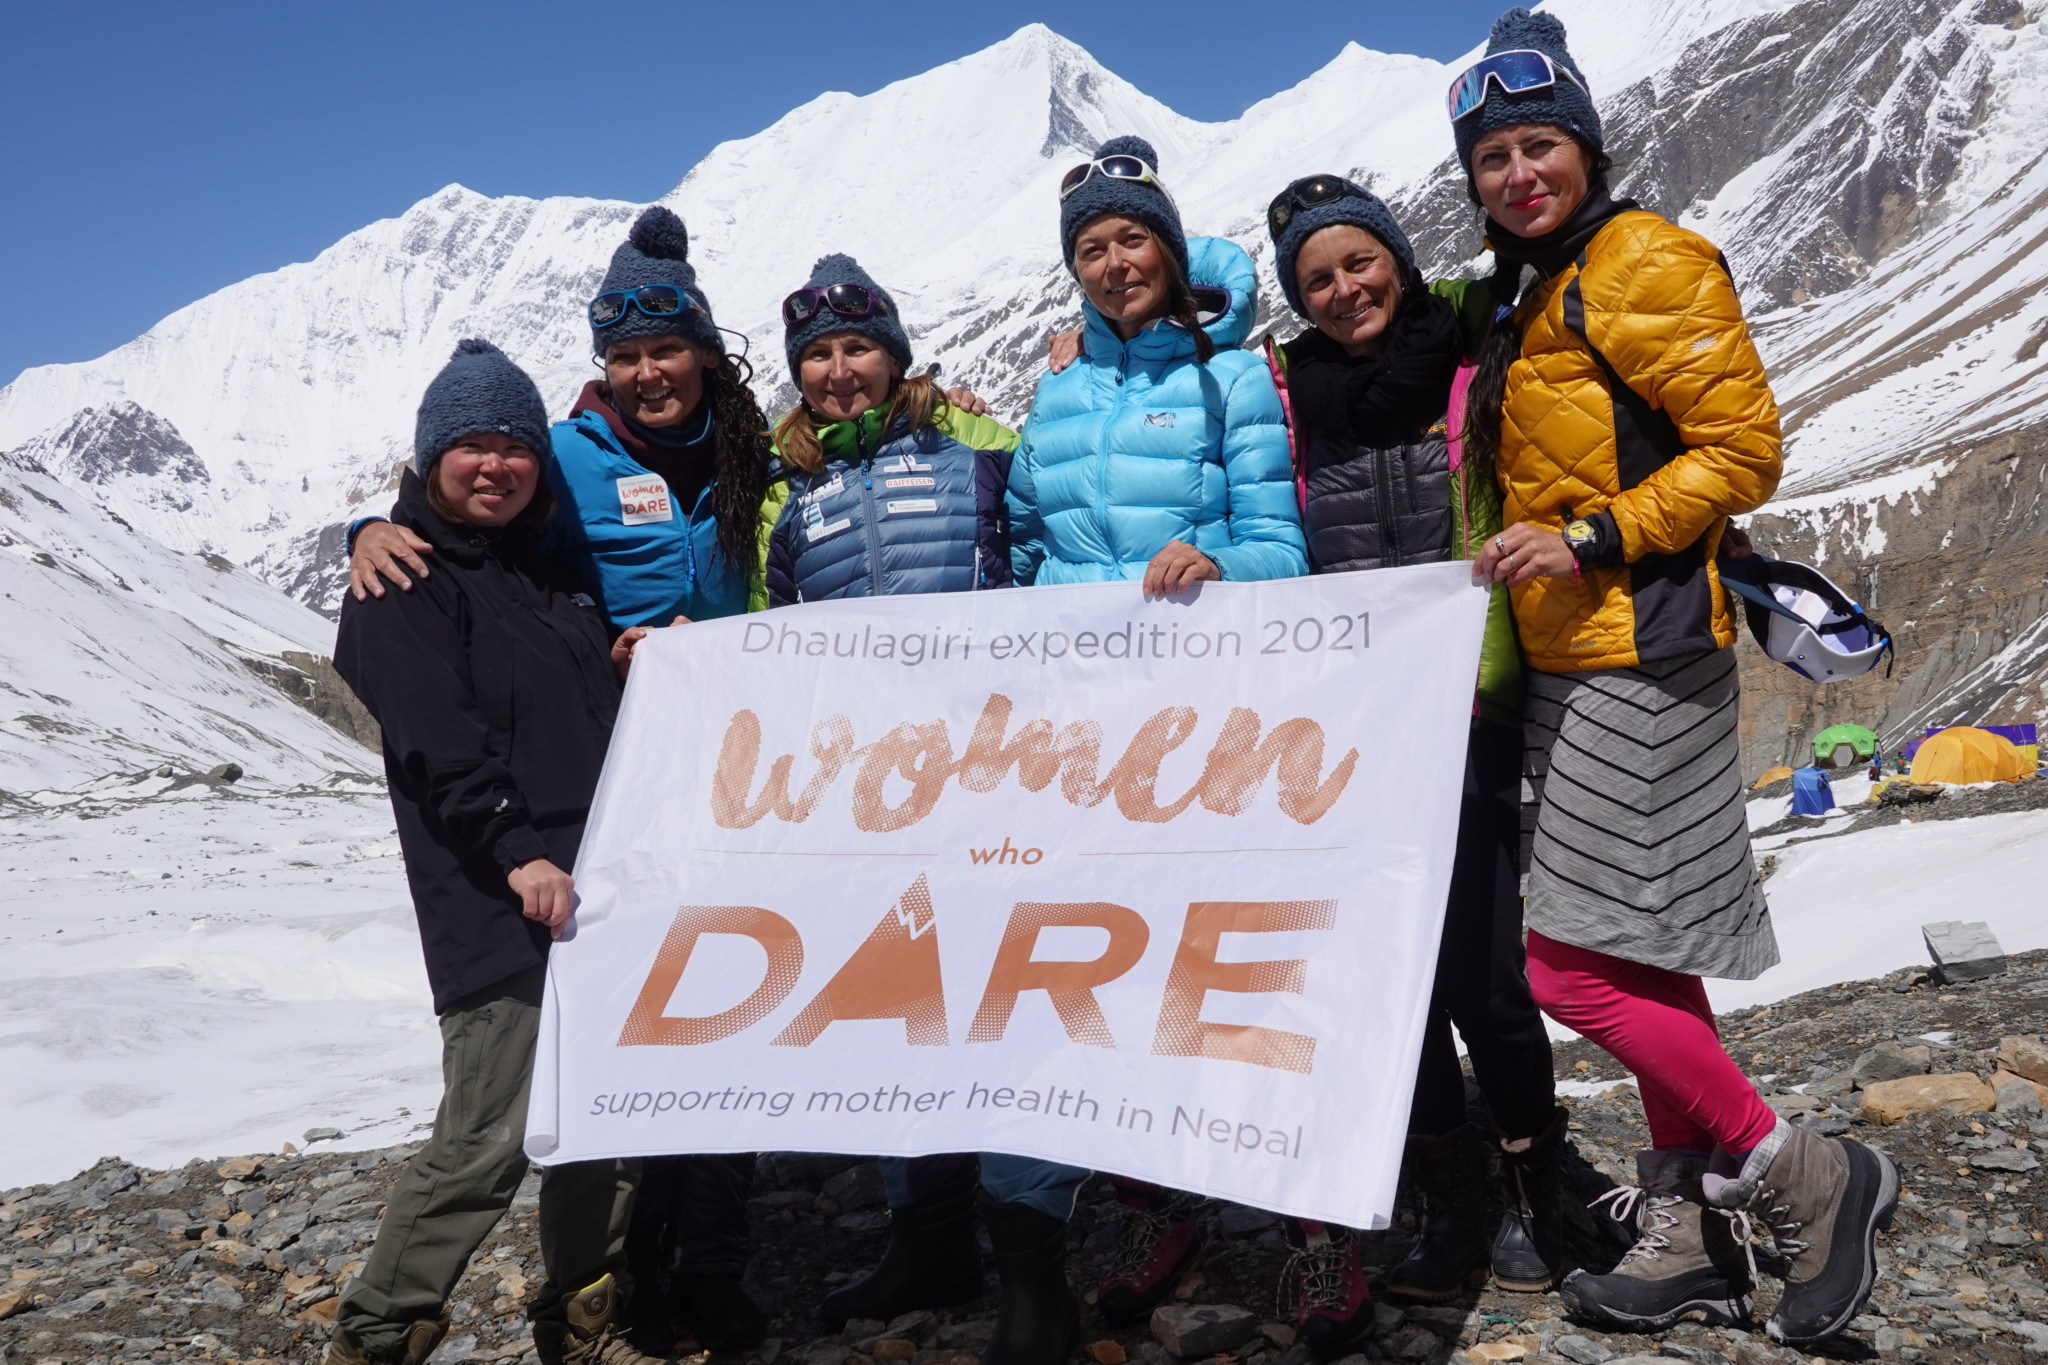 WOMEN WHO DARE, supporting mother health in Nepal